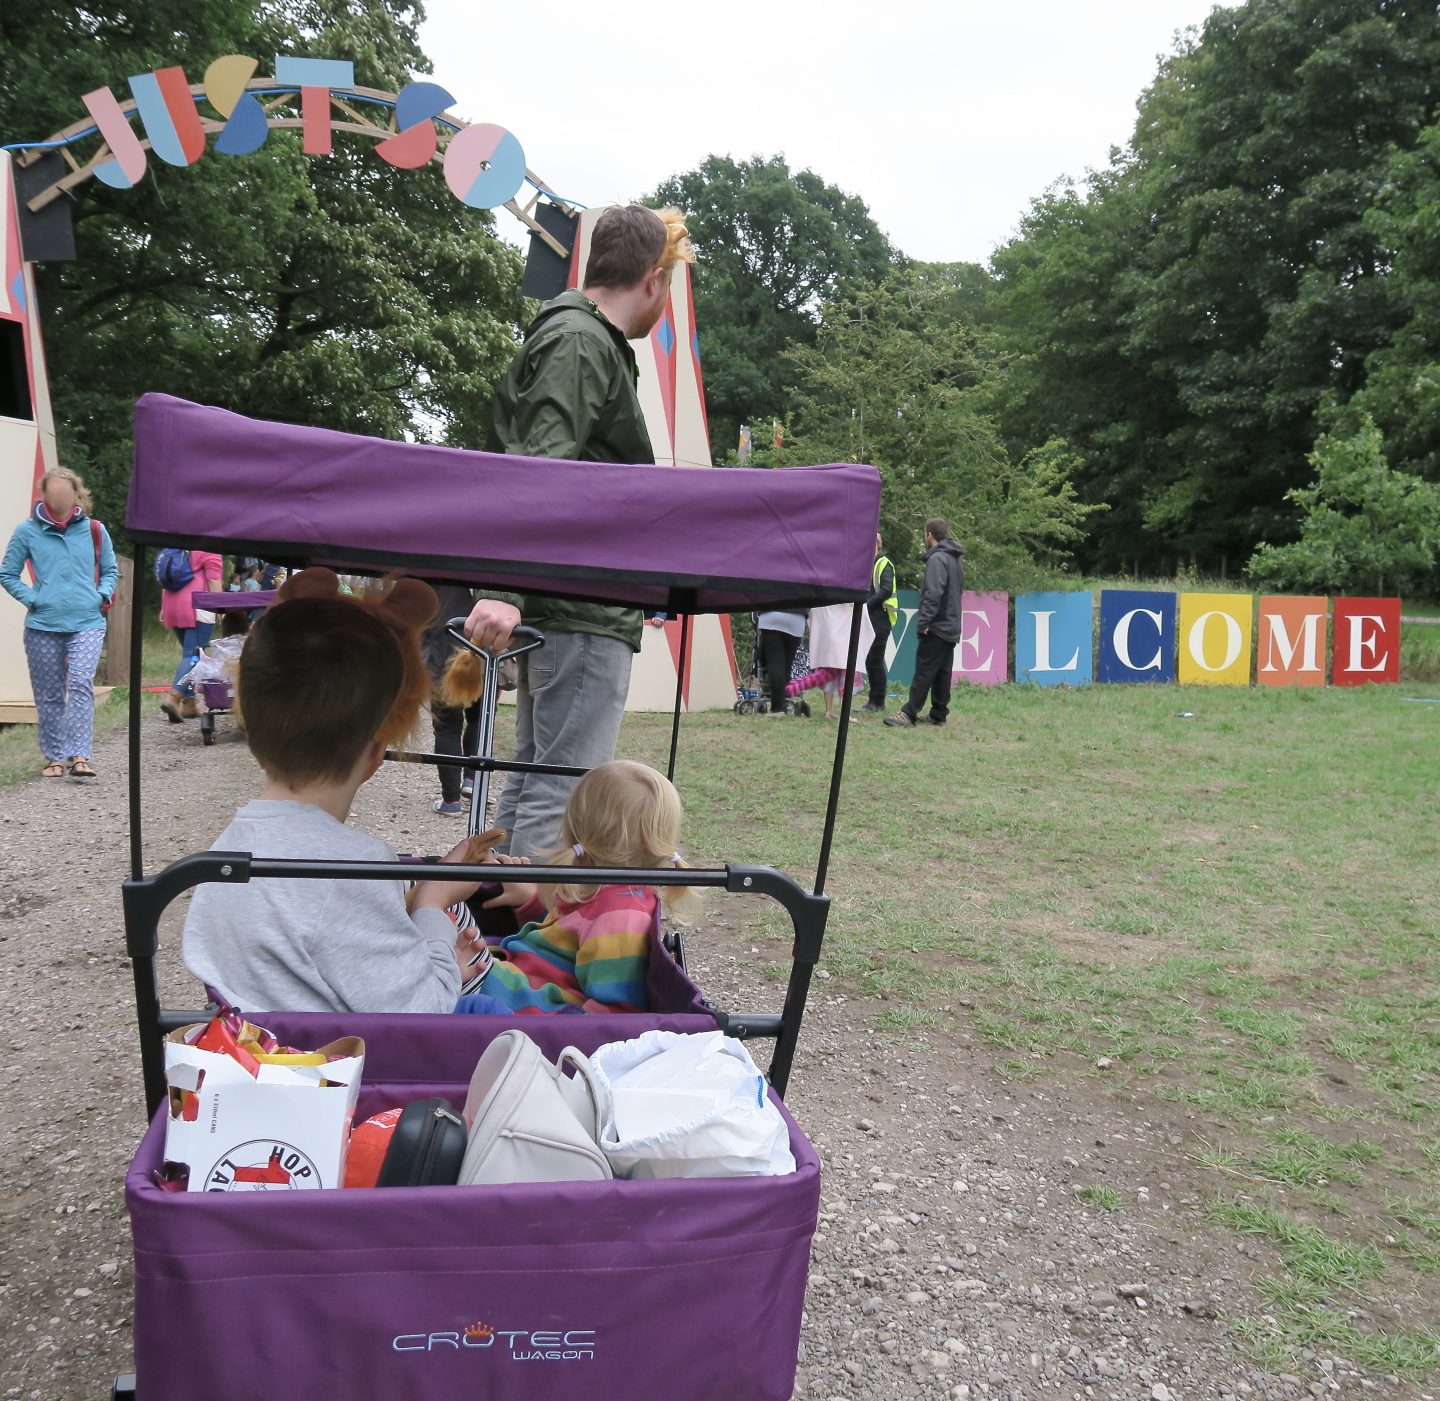 Festival wagons for kids - are they a good idea and which are the best?